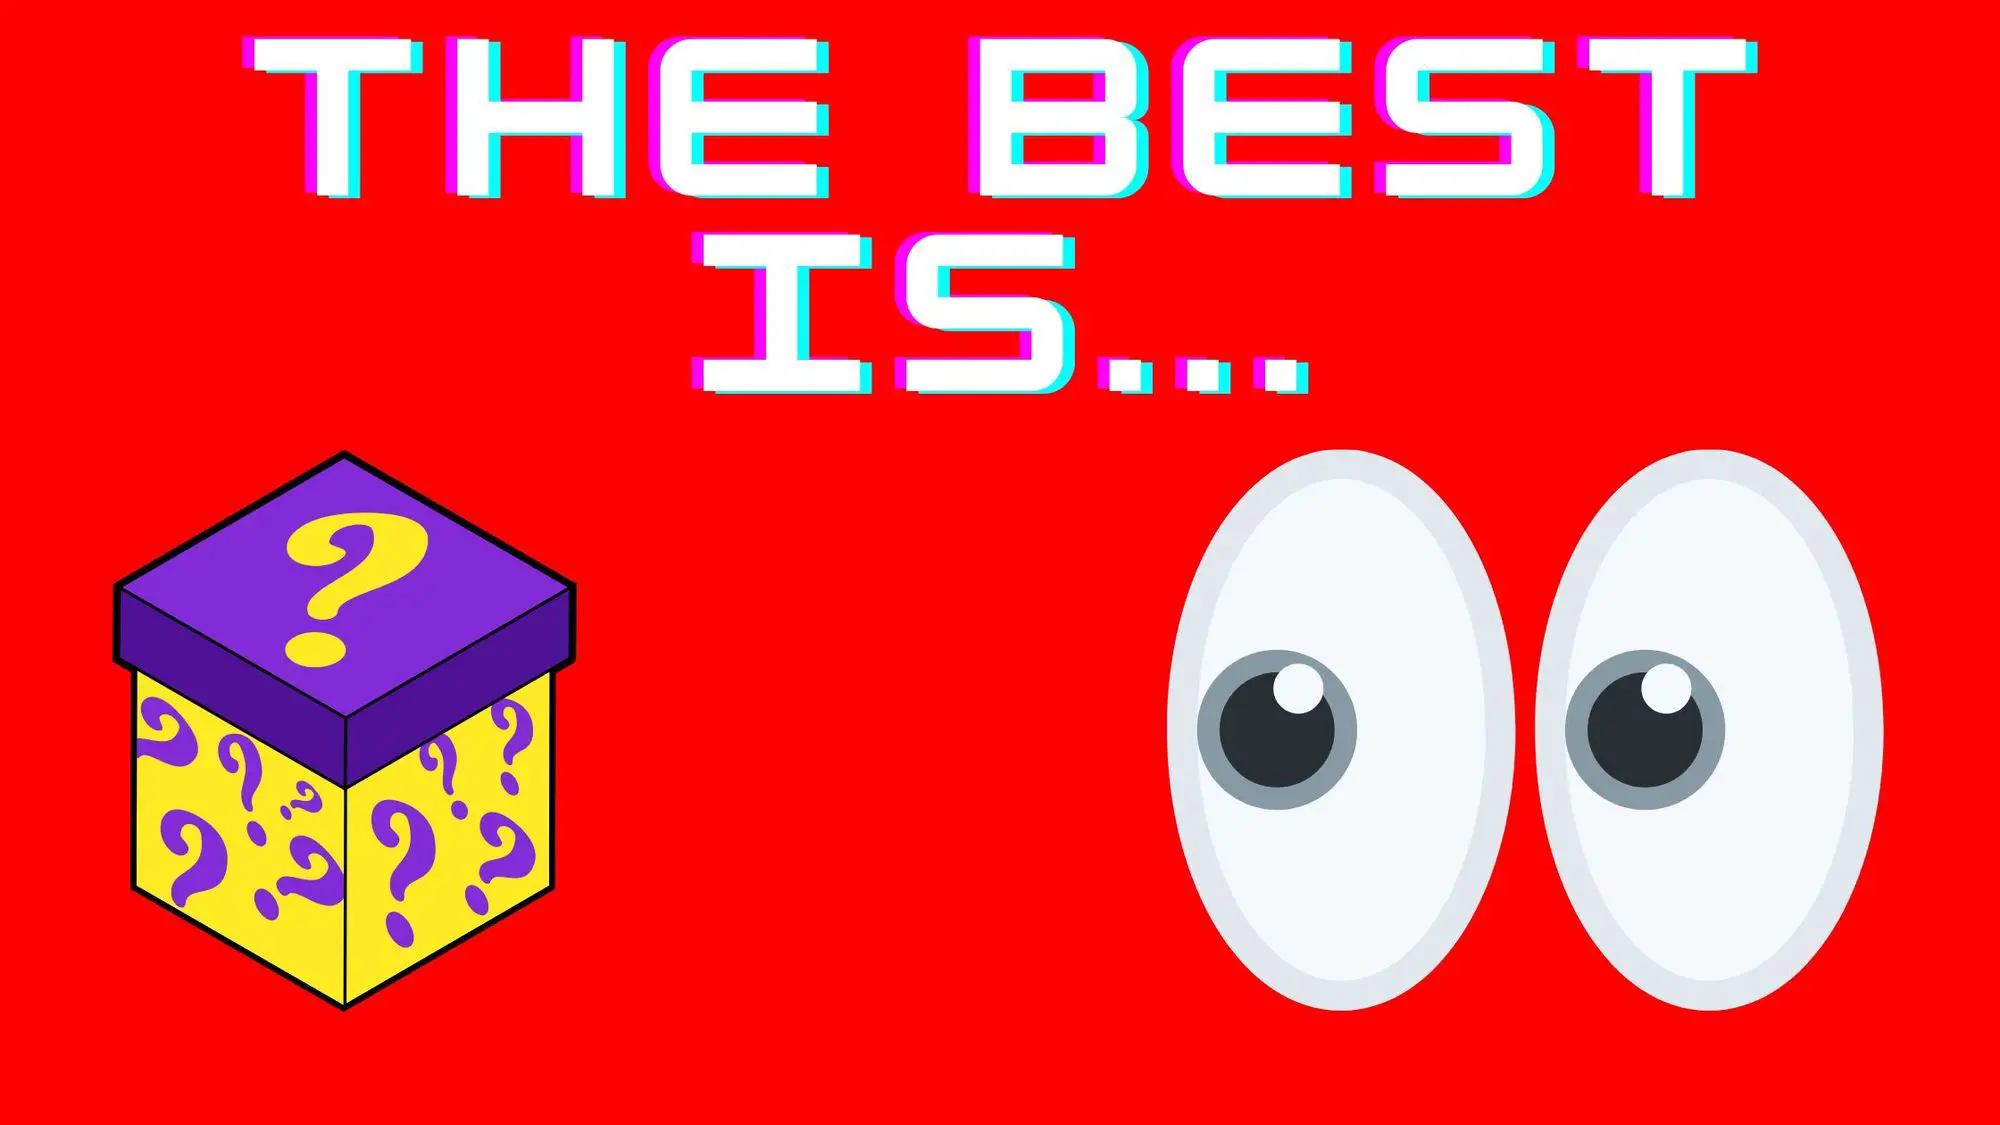 The best is...